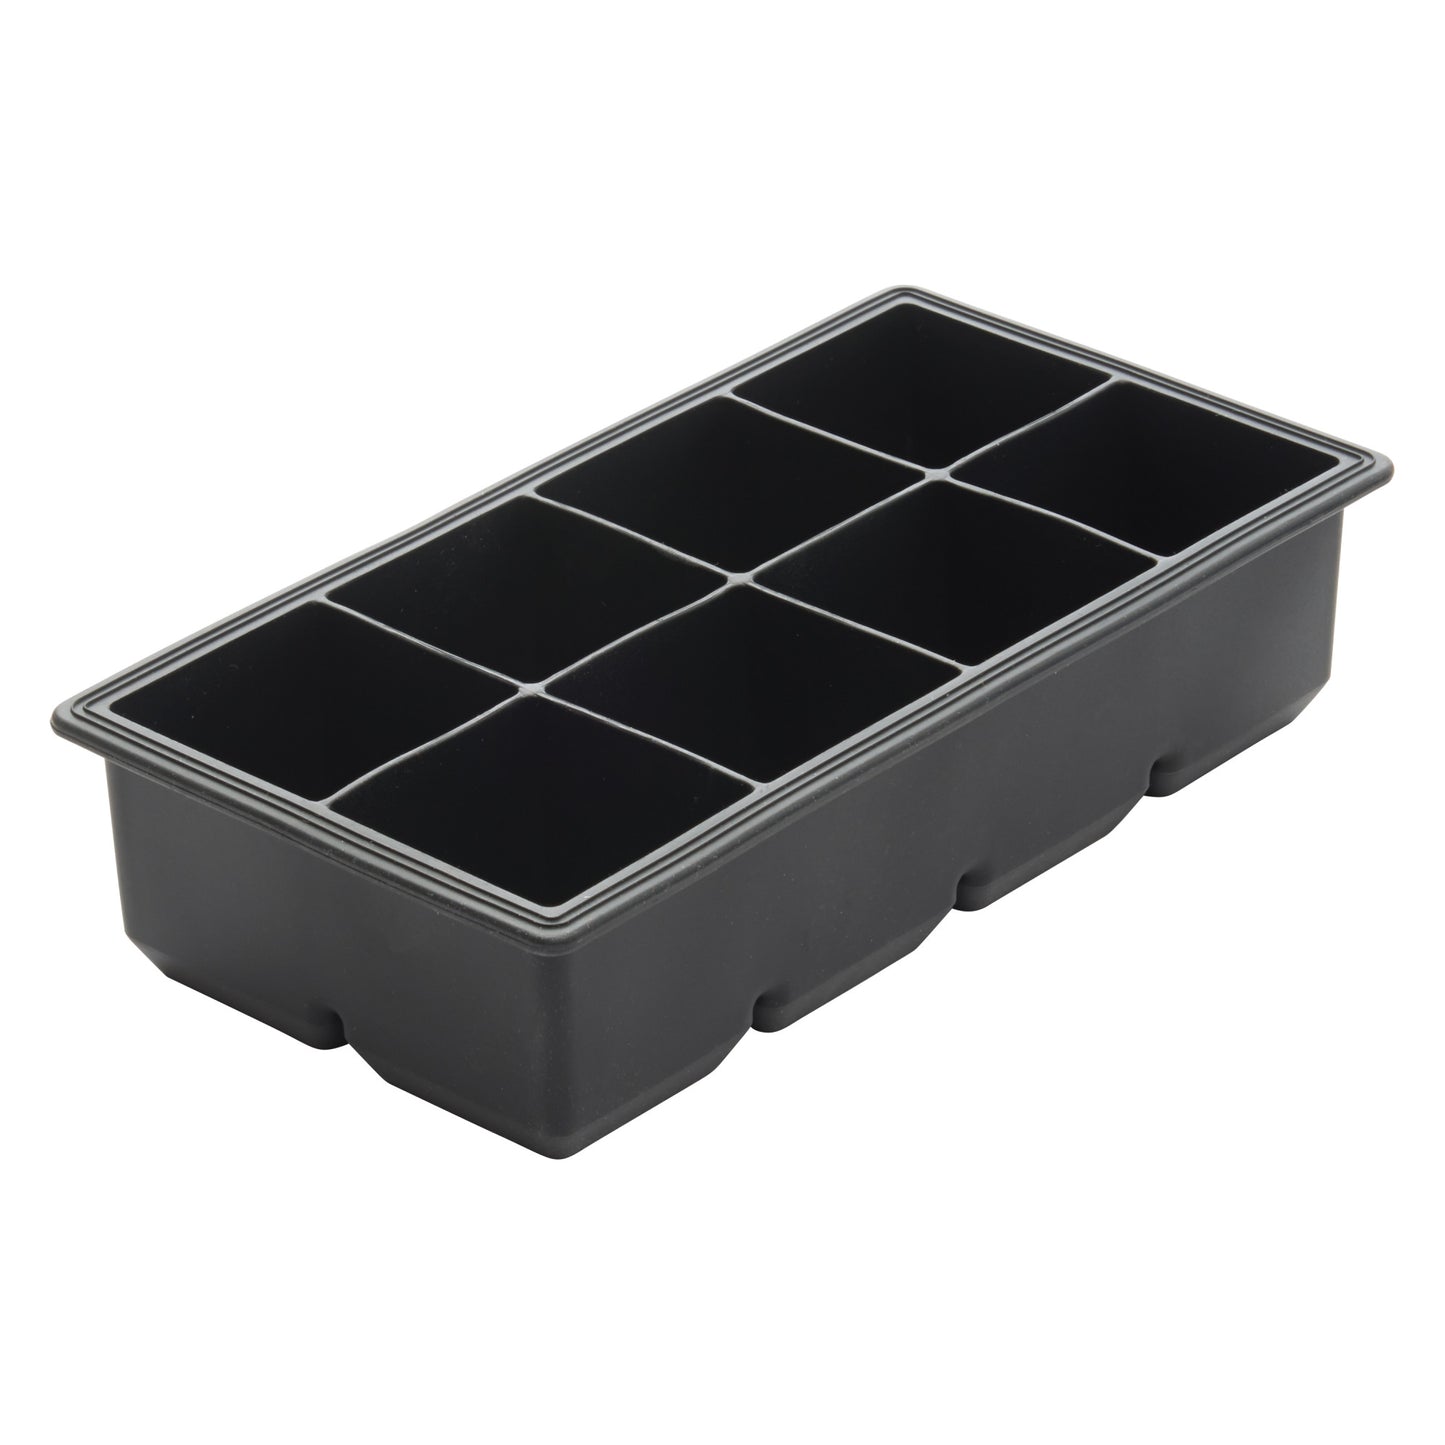 ICCT-8R - Ice cube tray, 8 compartments